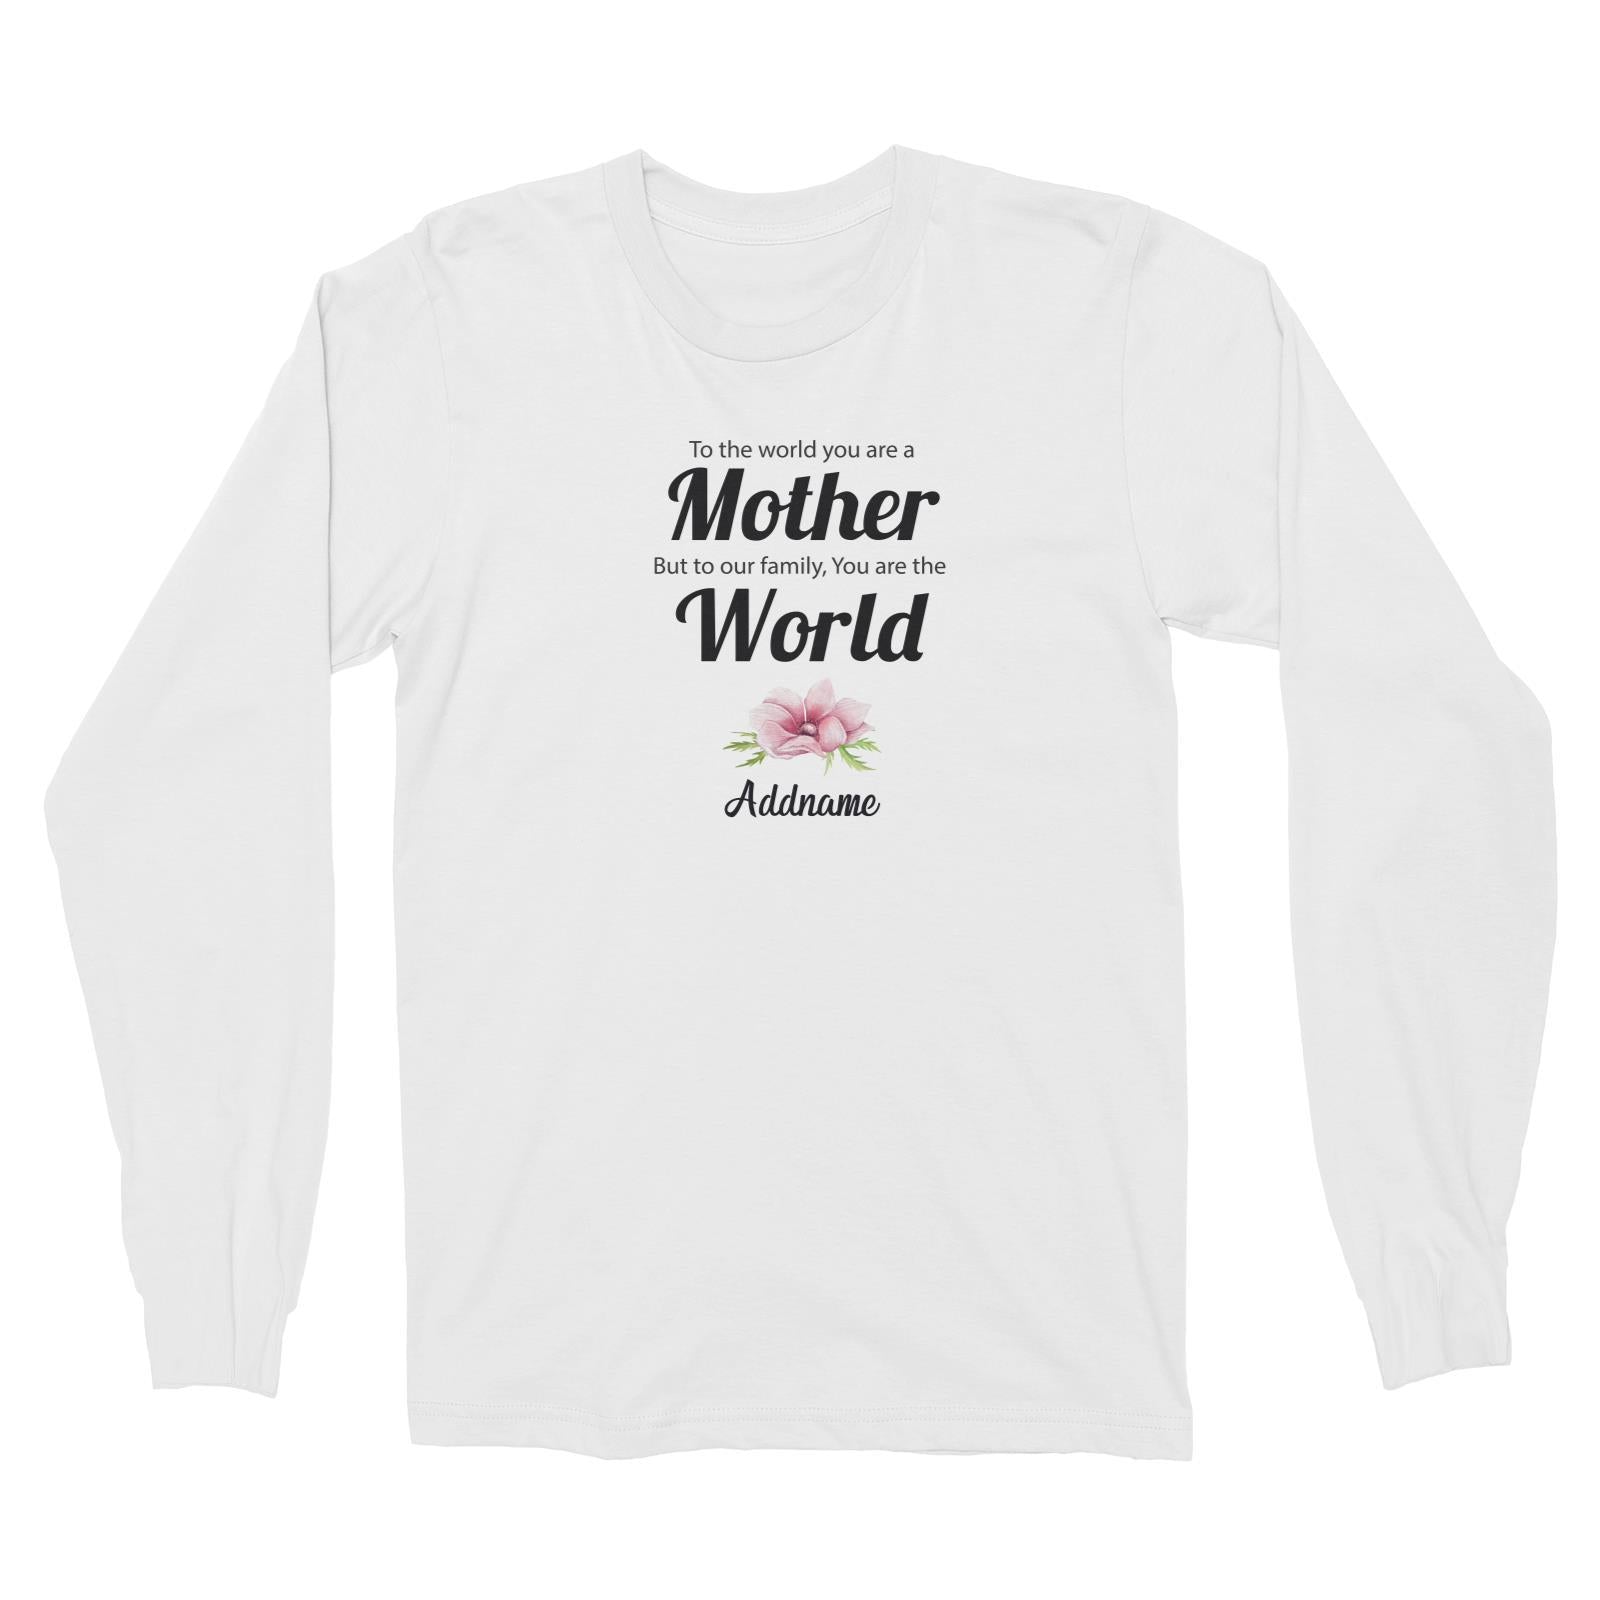 Sweet Mom Quotes 1 To The World You Are A Mother But To Our Family, You Are The World Addname Long Sleeve Unisex T-Shirt